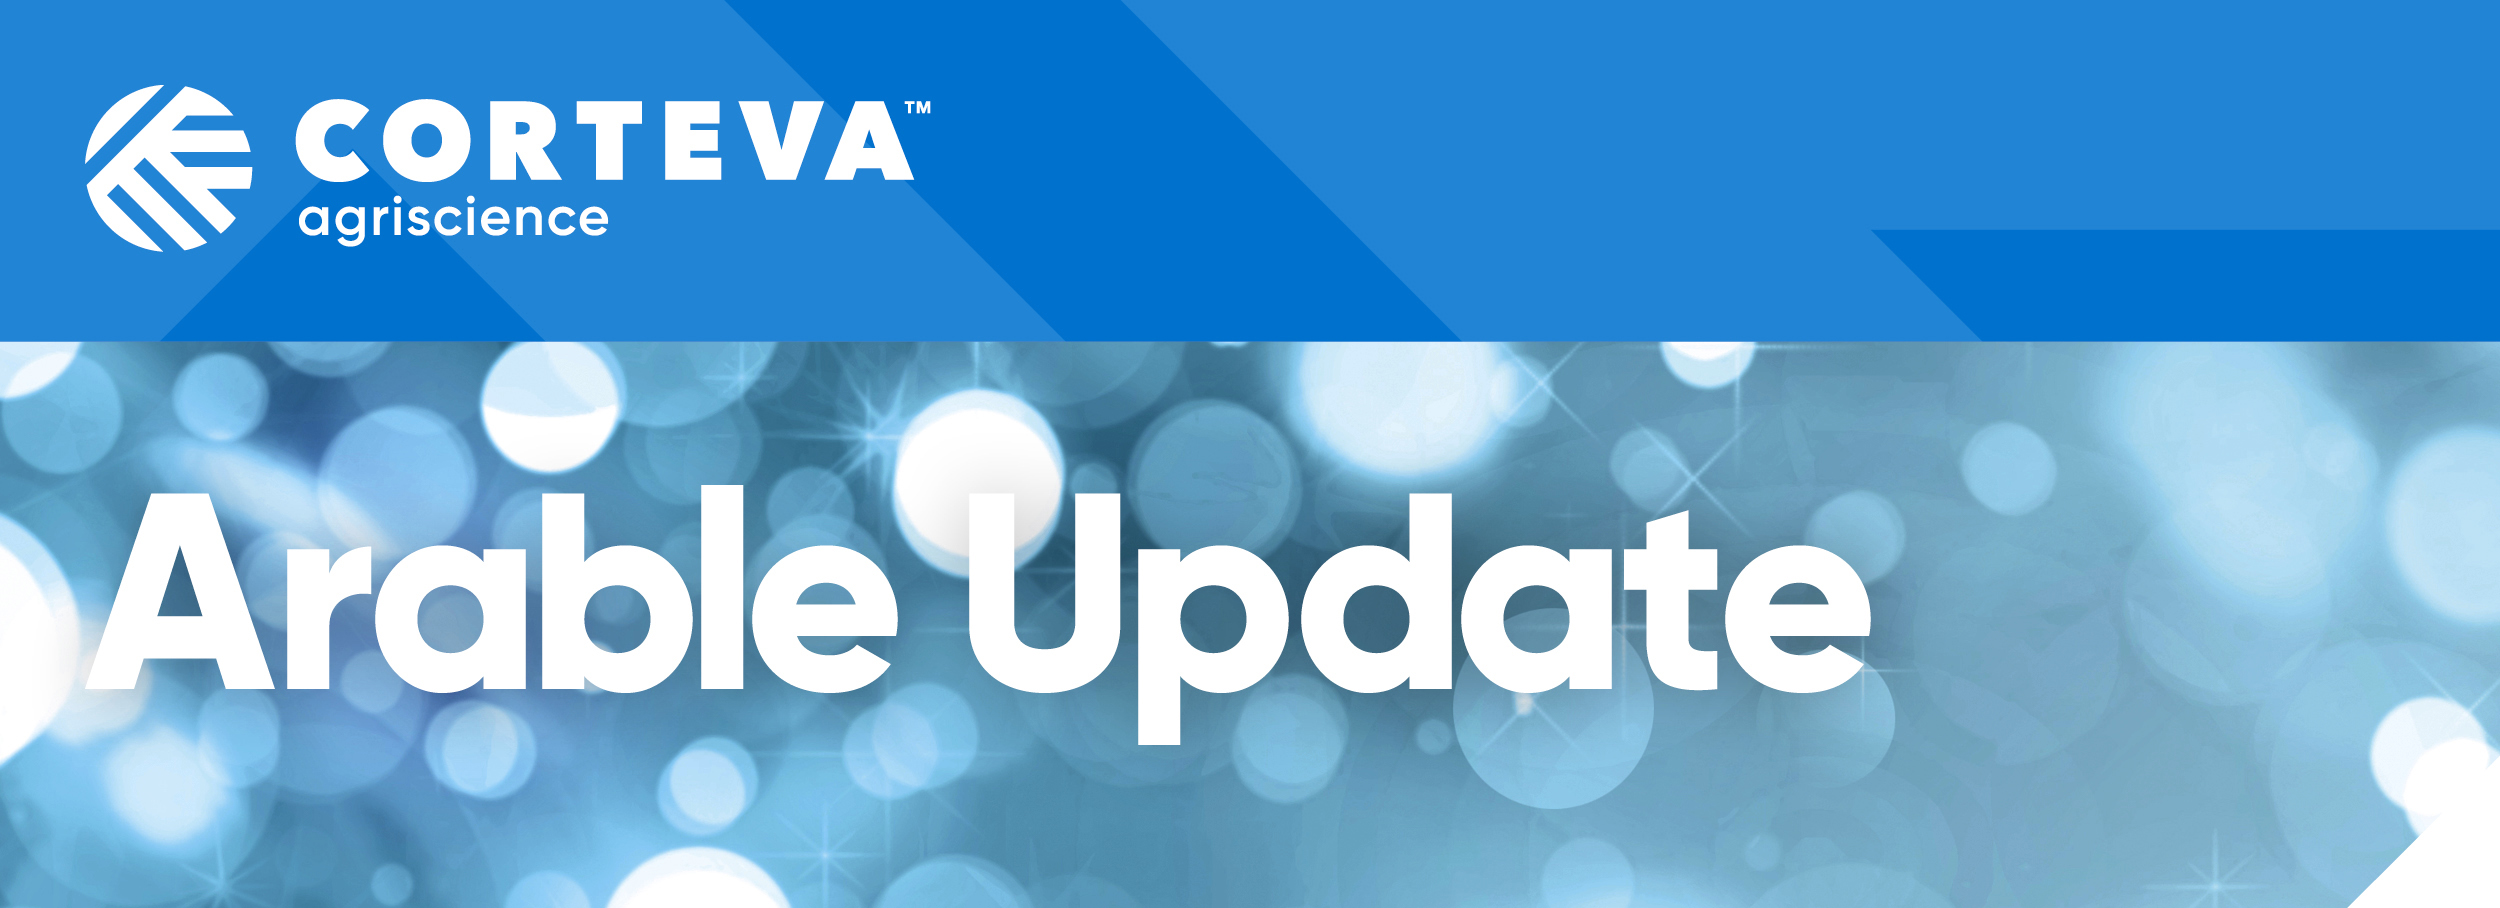 Arable Update from Corteva Agriscience UK